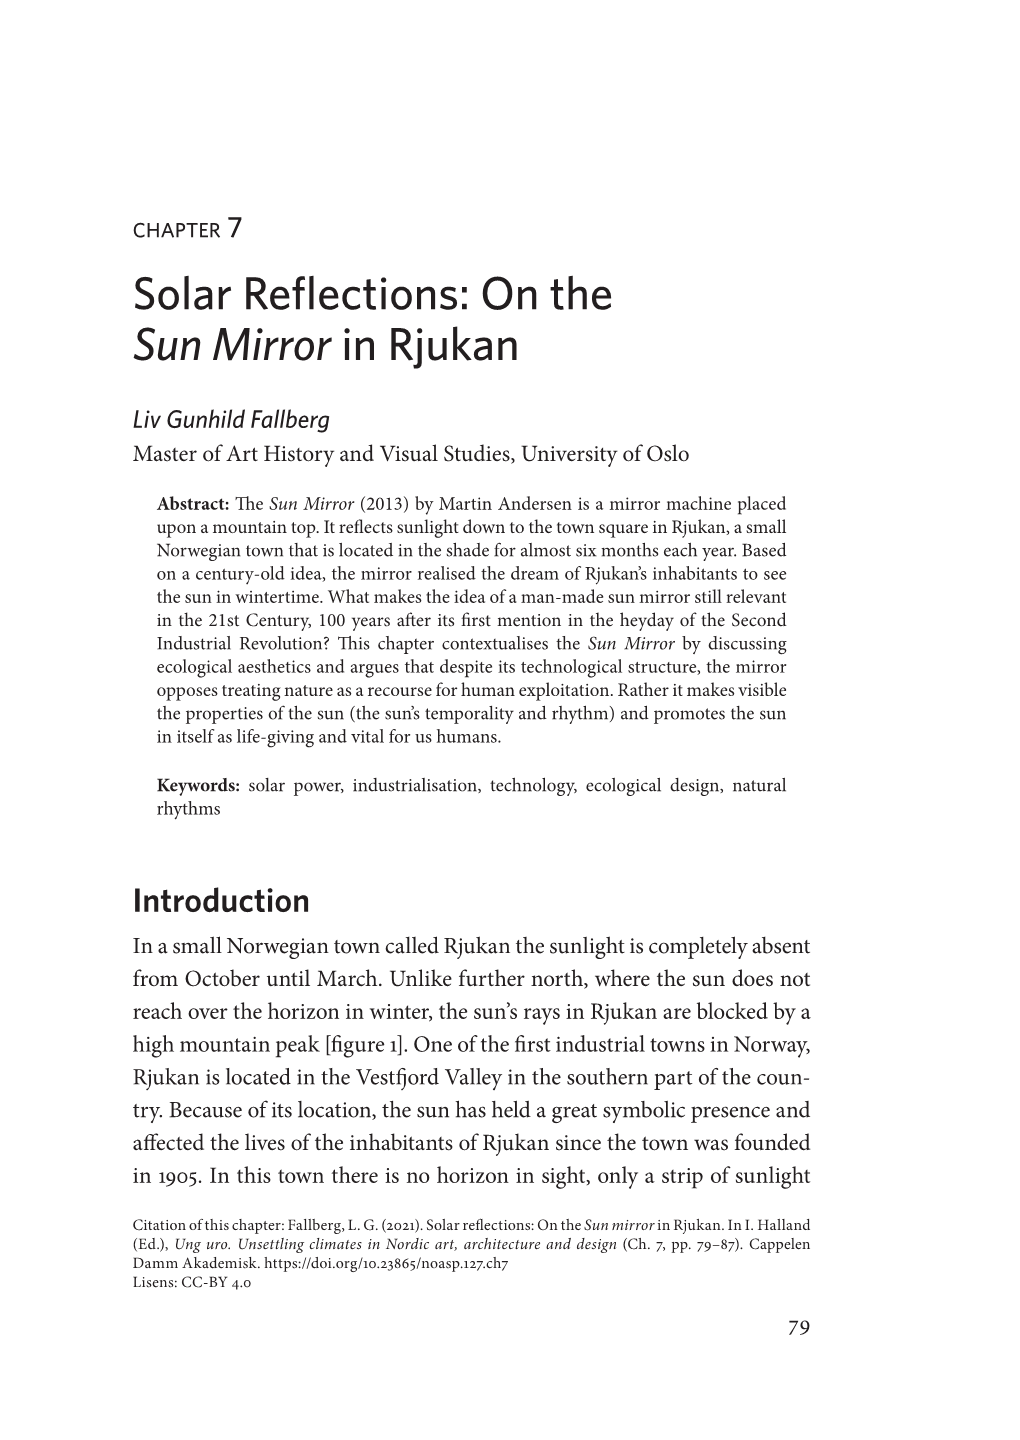 Chapter 7. Solar Reflections: on the Sun Mirror in Rjukan Liv Gunhild